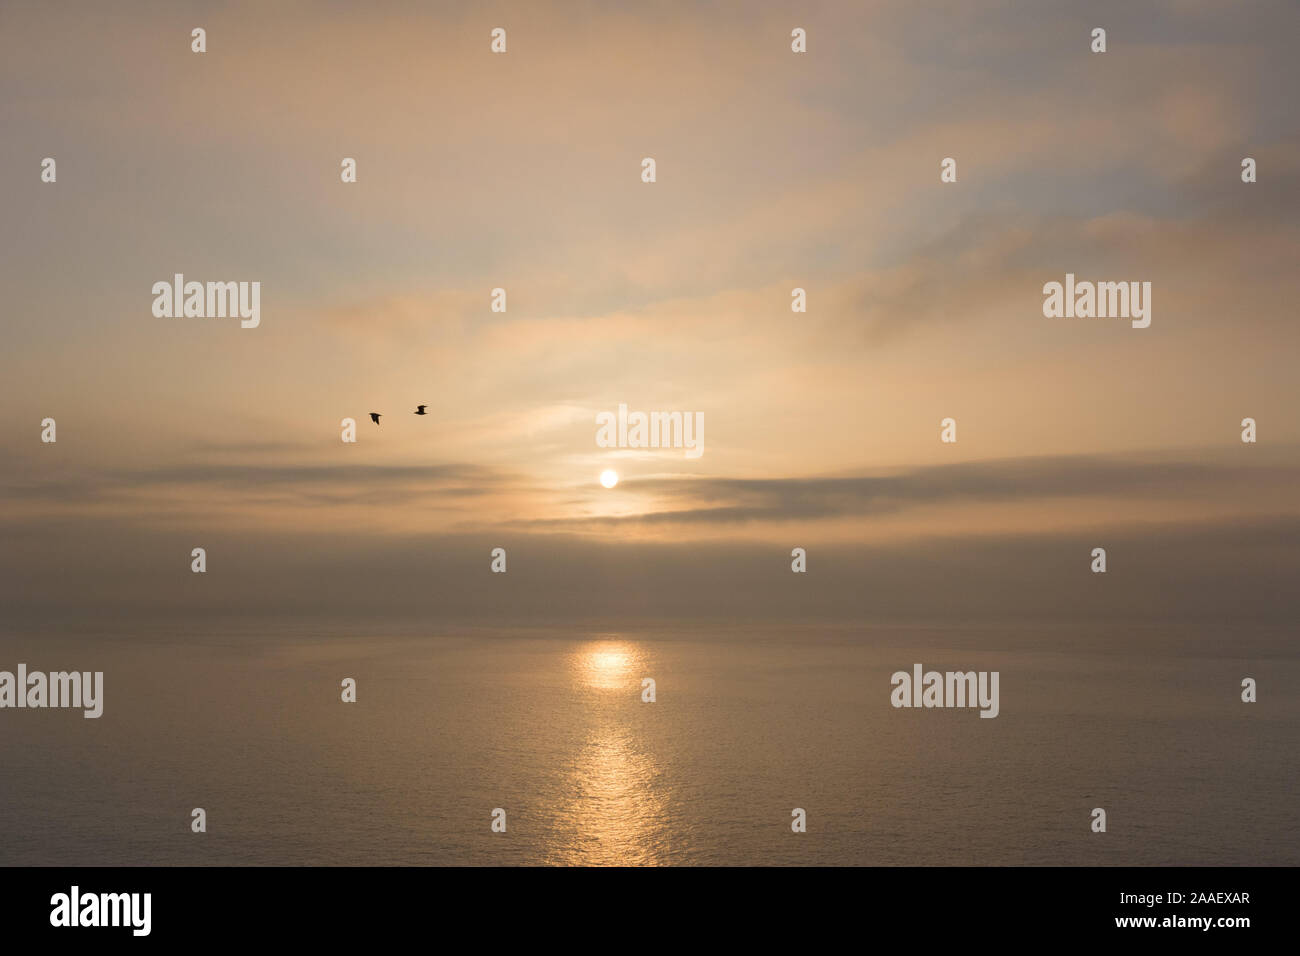 Two seagulls are silhouetted against a tranquil sunrise over the sea at Durleston, Dorset, England. Stock Photo